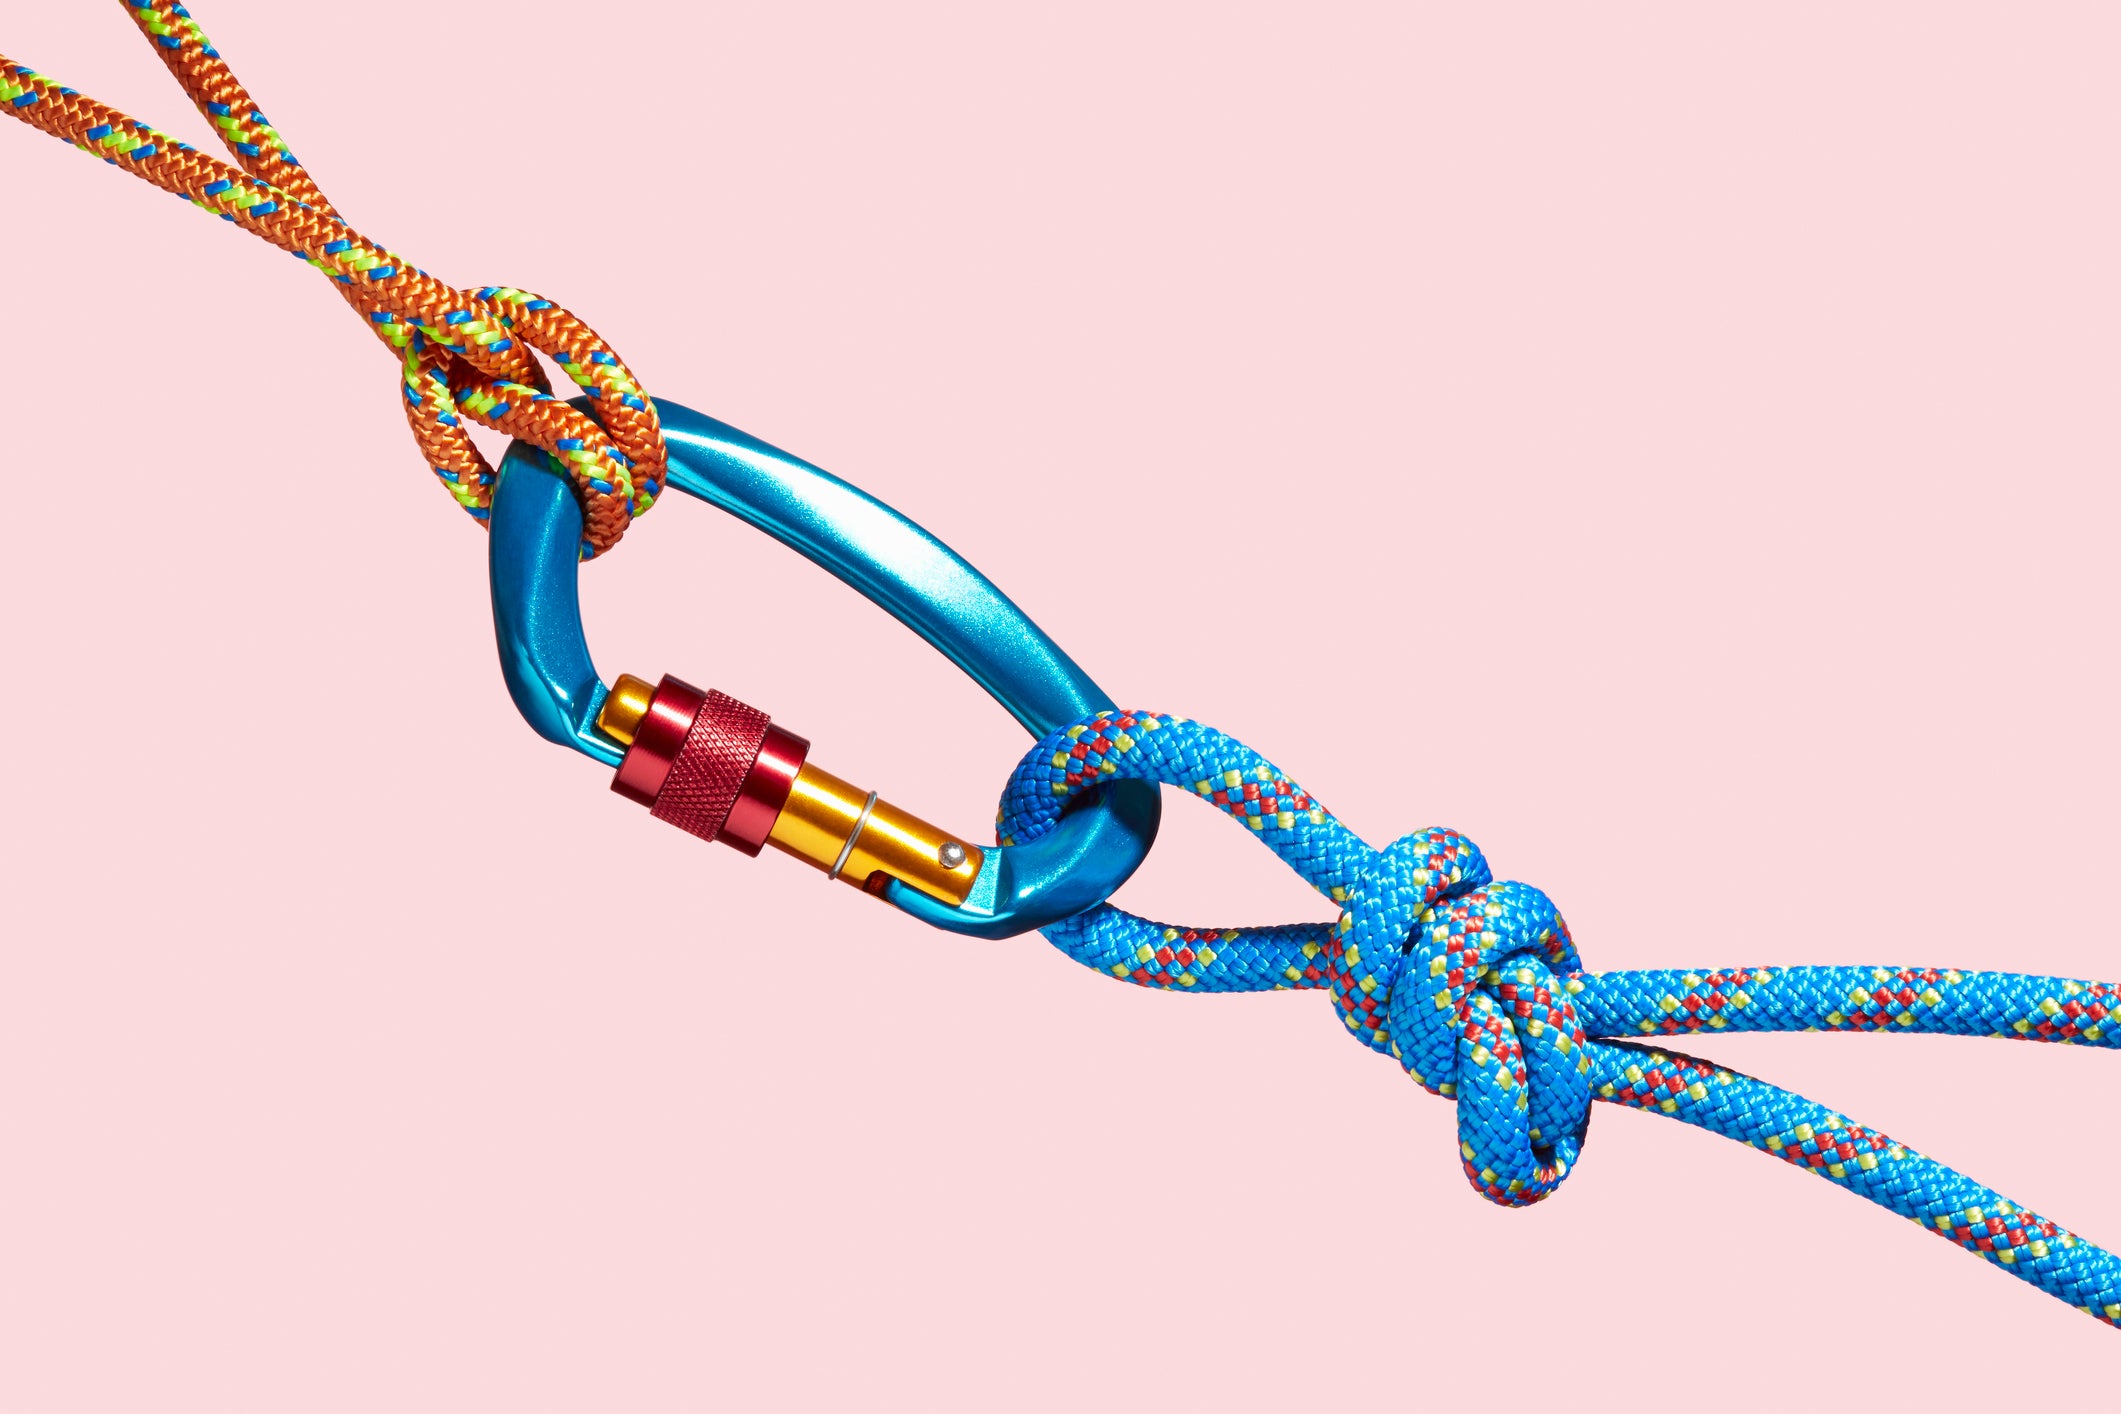 10 Facts About Climbing Knots